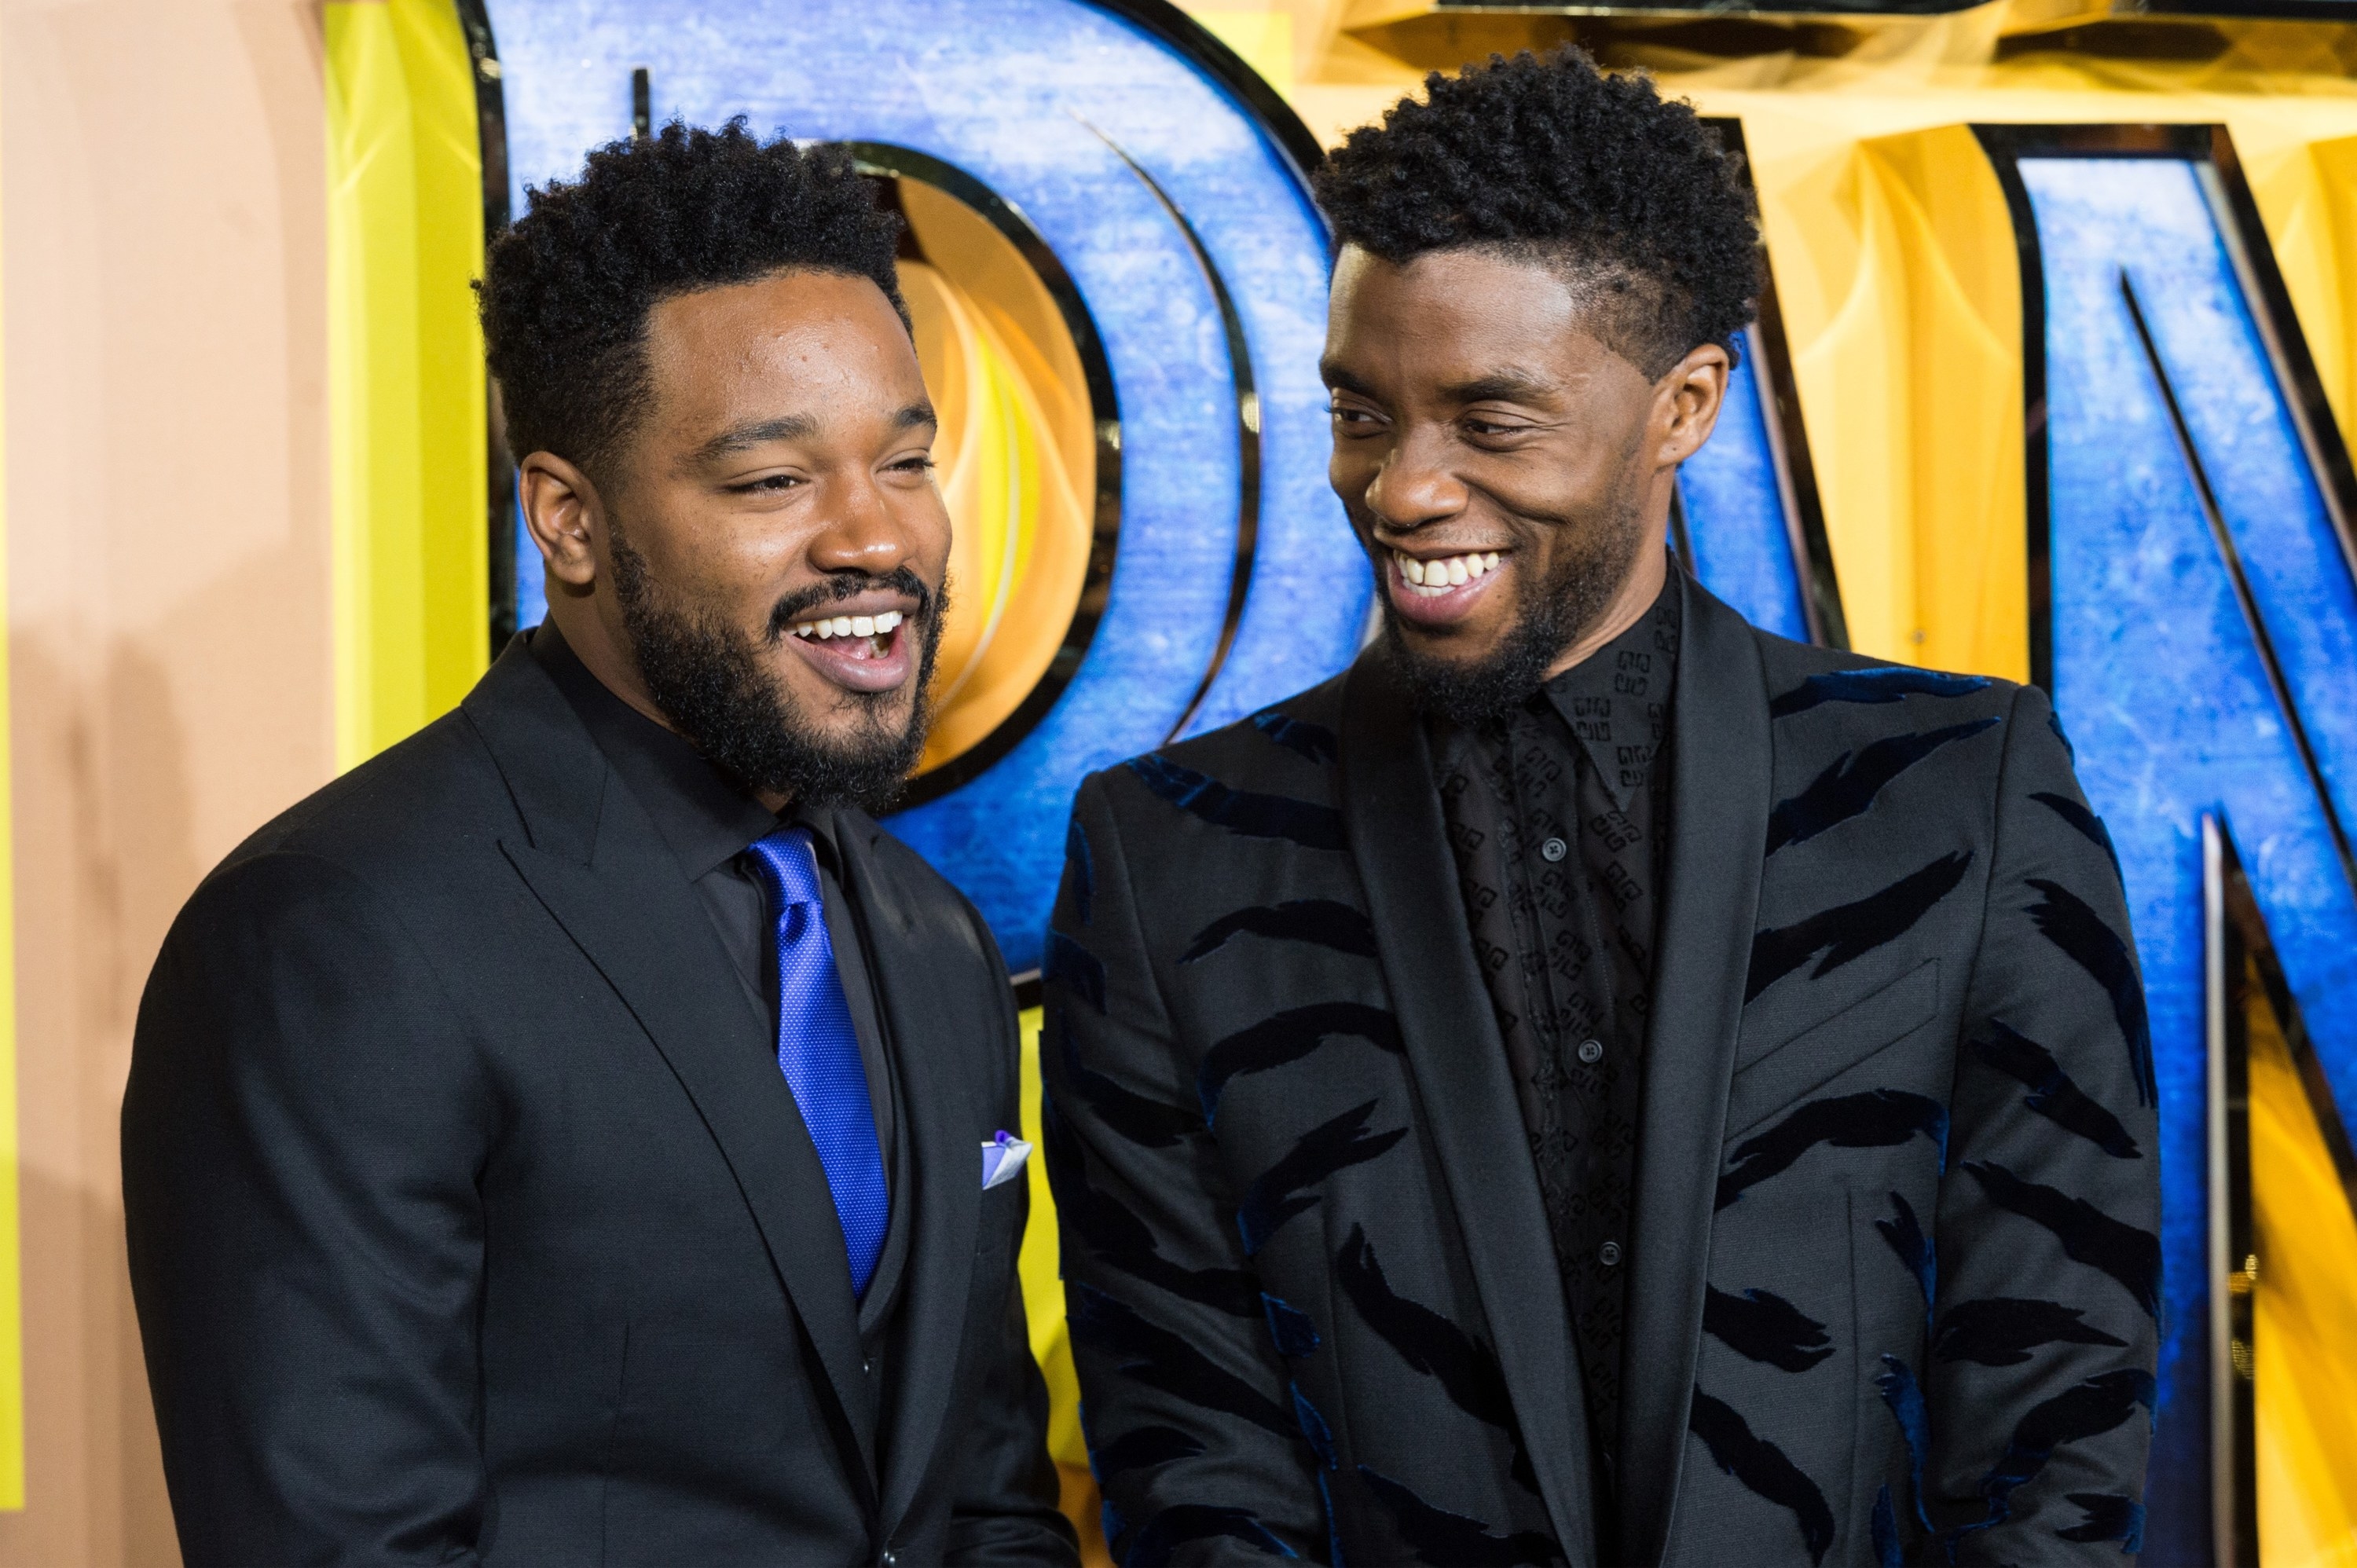 Ryan and Chadwick smiling together at a red carpet event